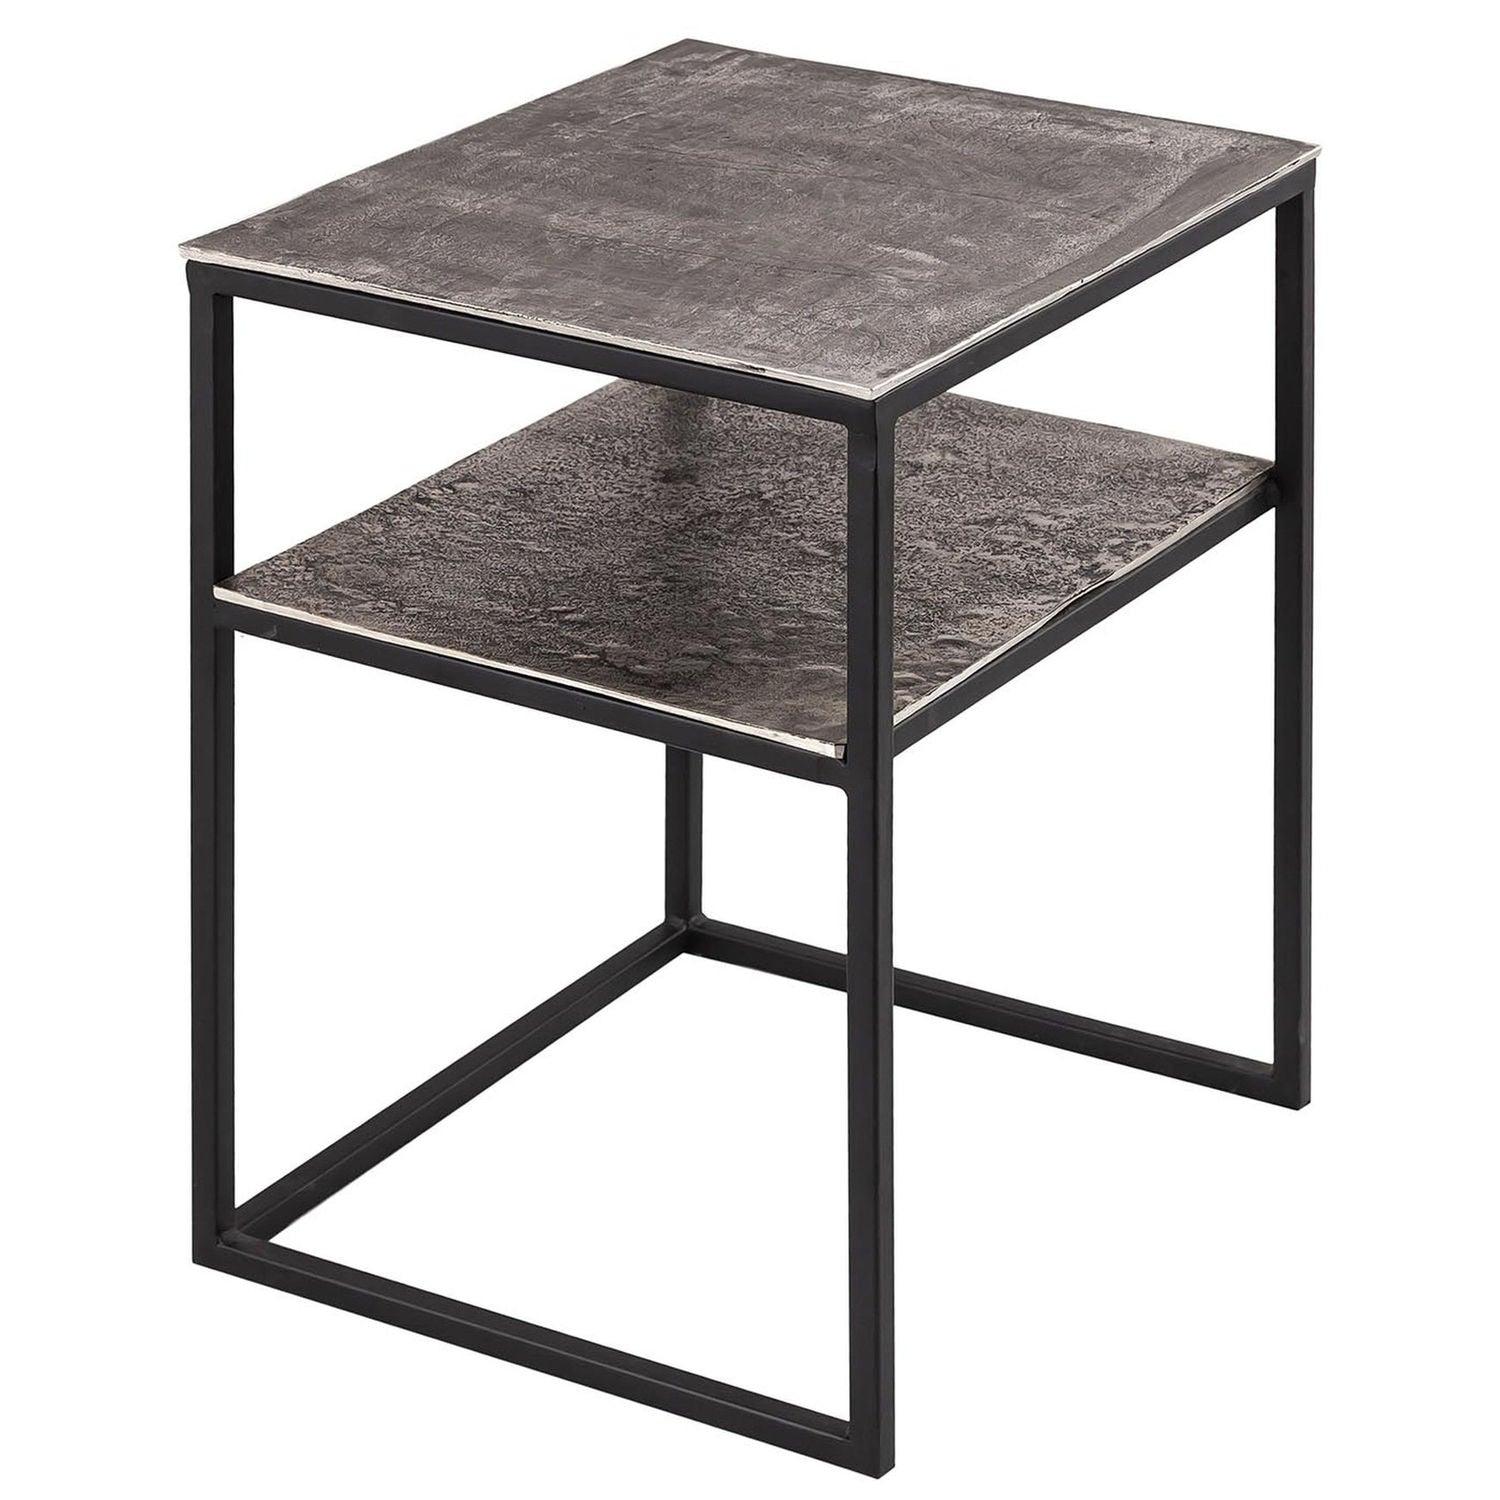 View Farrah Collection Silver Side Table with Shelf information